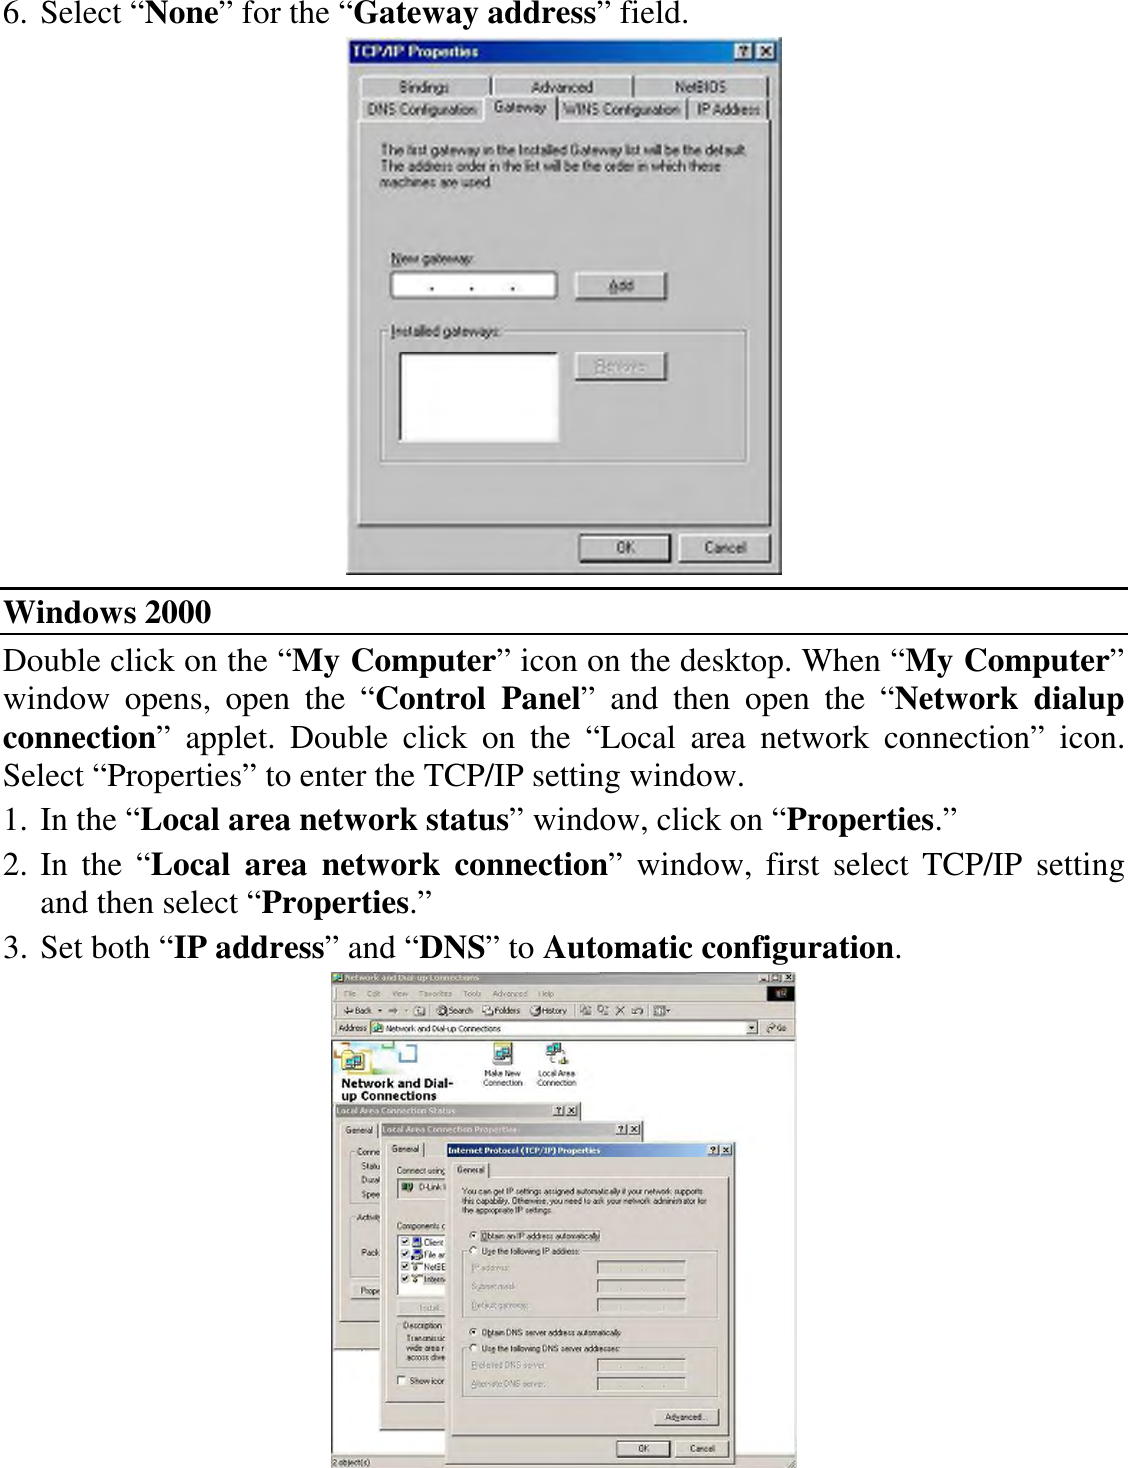 6. Select “None” for the “Gateway address” field.  Windows 2000 Double click on the “My Computer” icon on the desktop. When “My Computer” window  opens,  open  the  “Control  Panel”  and  then  open  the  “Network  dialup connection”  applet.  Double  click  on  the  “Local  area  network  connection”  icon. Select “Properties” to enter the TCP/IP setting window. 1. In the “Local area network status” window, click on “Properties.” 2. In  the  “Local  area  network  connection”  window,  first  select  TCP/IP  setting and then select “Properties.” 3. Set both “IP address” and “DNS” to Automatic configuration.  